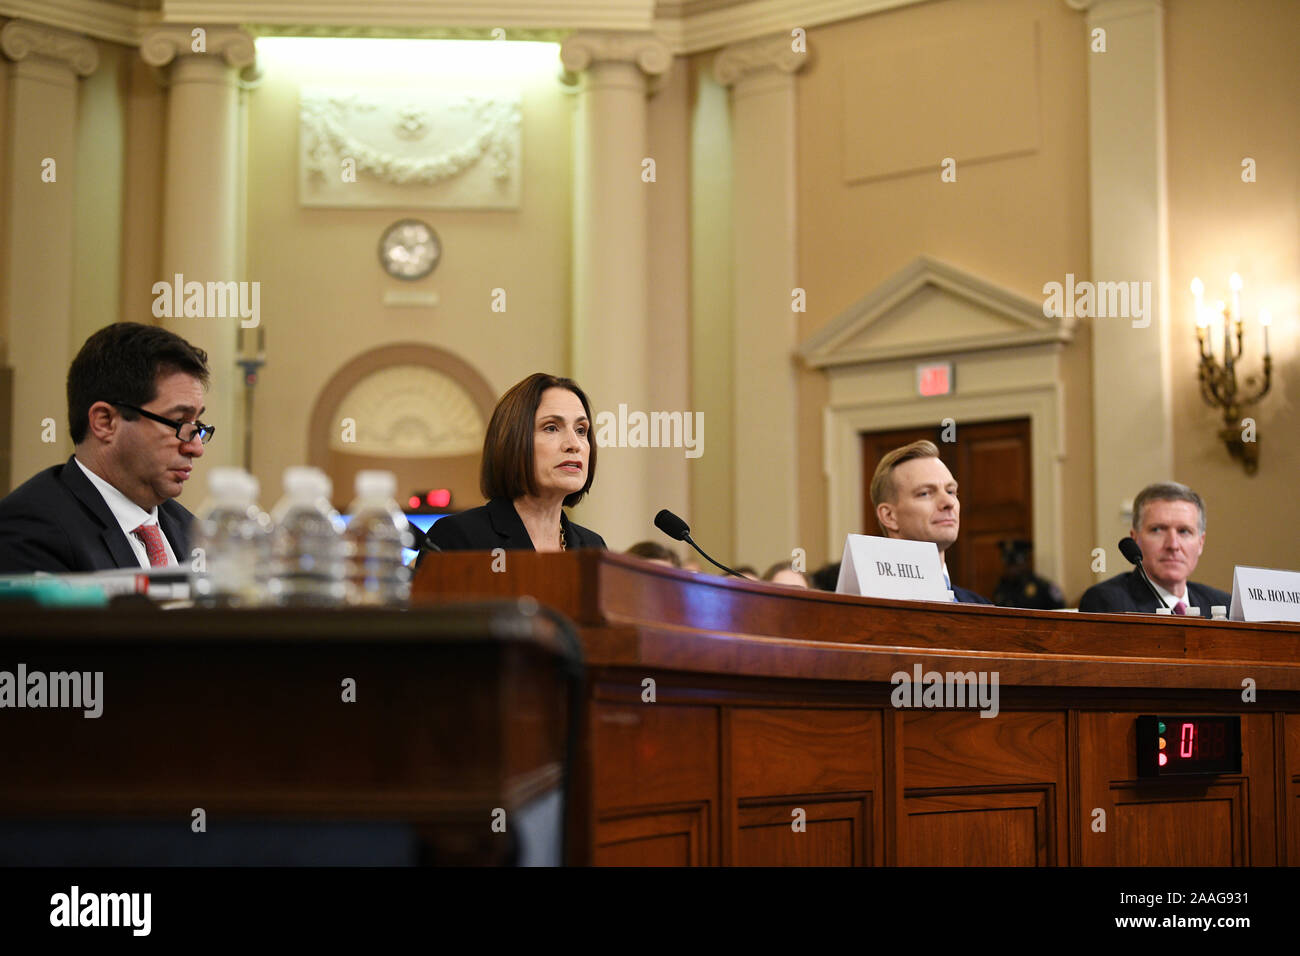 Washington, USA. 21st Nov, 2019. Fiona Hill (2nd L), former National Security Council senior director for Europe and Russia, and David Holmes (2nd R), a staffer from the U.S. Embassy in Ukraine, testify before the U.S. House Intelligence Committee on Capitol Hill in Washington, DC, the United States, on Nov. 21, 2019. The last two witnesses scheduled for publicly testifying before a House panel as part of an impeachment inquiry into U.S. President Donald Trump offered their narratives of events relating to the investigation on Thursday. Credit: Liu Jie/Xinhua/Alamy Live News Stock Photo